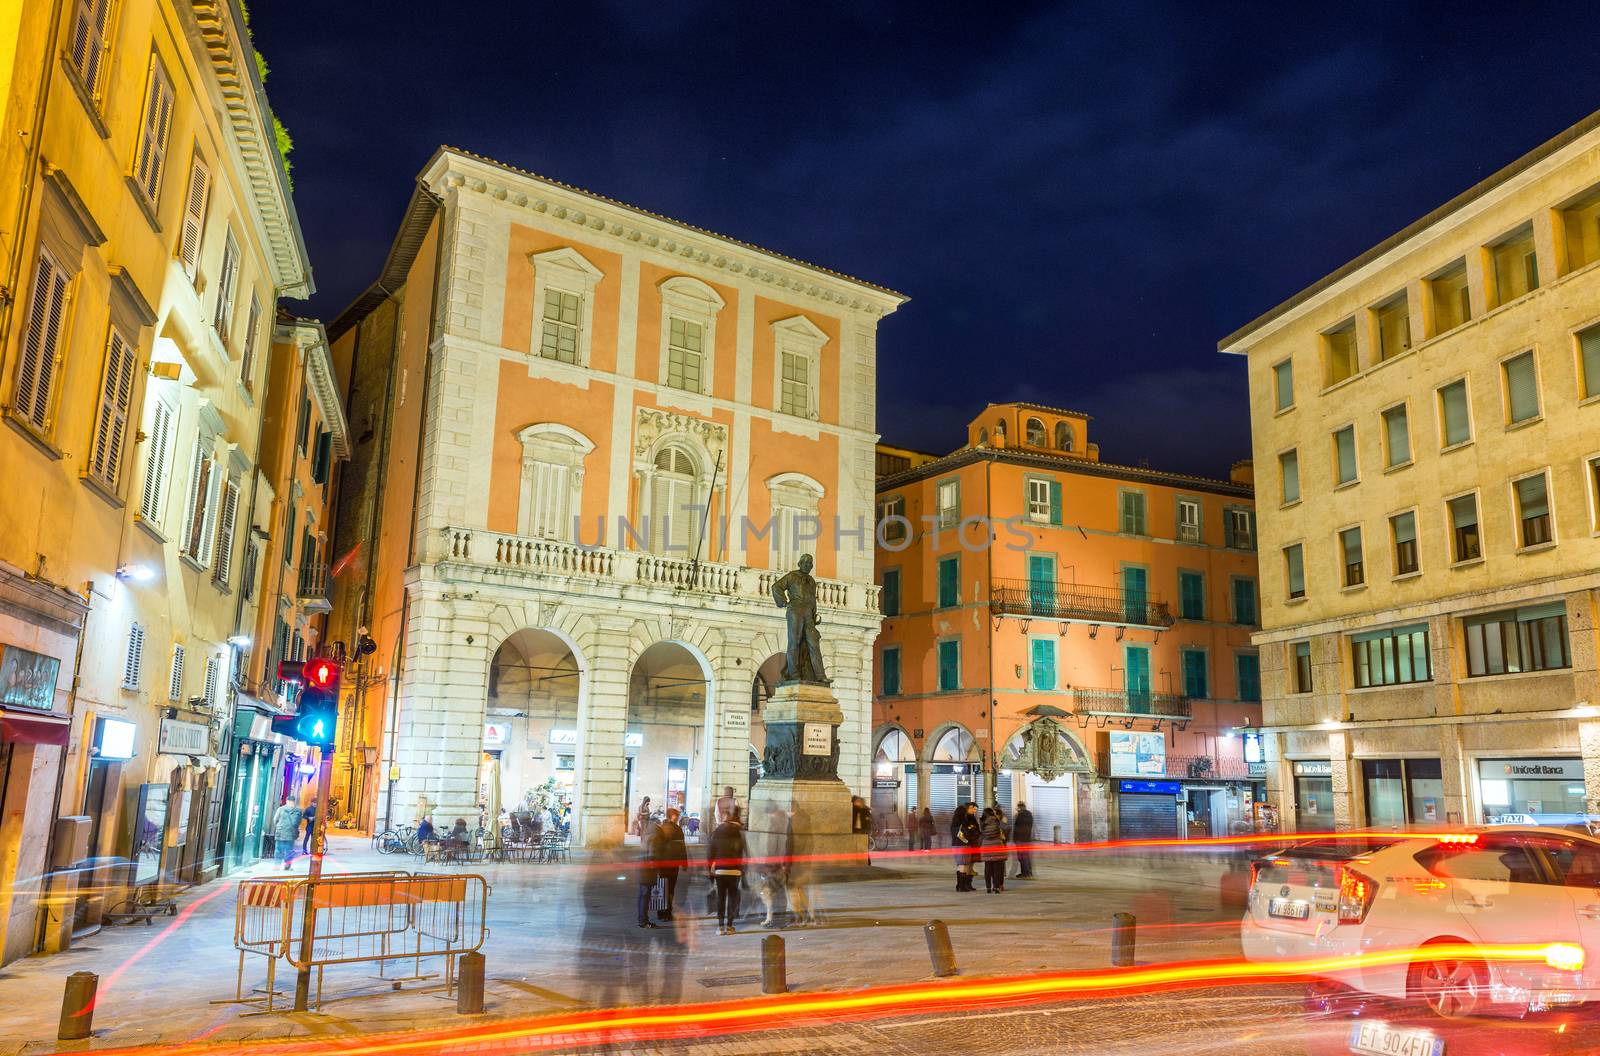 PISA, ITALY - MAY 24, 2014: Tourists in Garibaldi Square at night. The city attracts 3 million people annually.